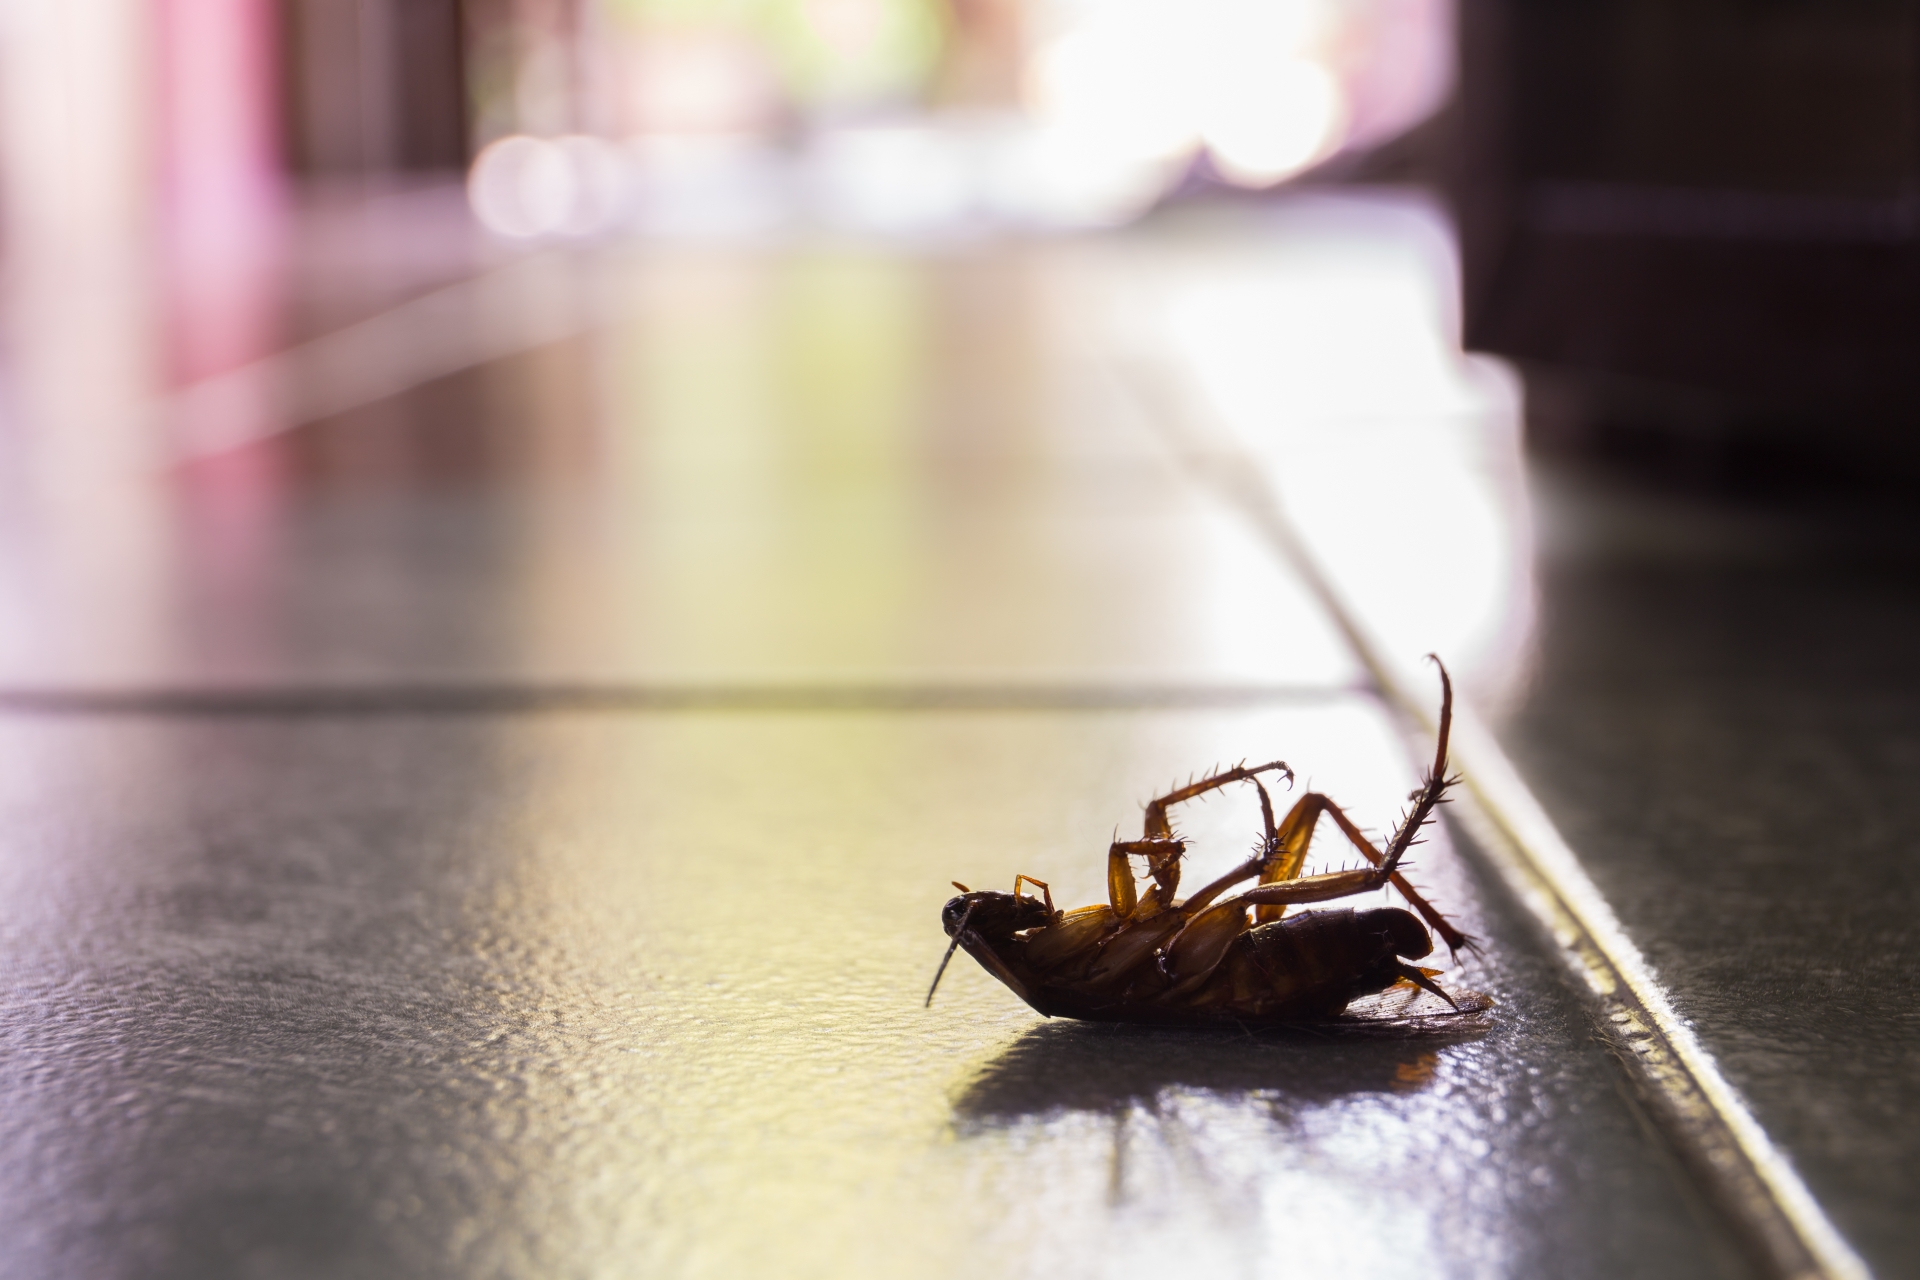 Cockroach Control, Pest Control in Stockwell, SW9. Call Now 020 8166 9746